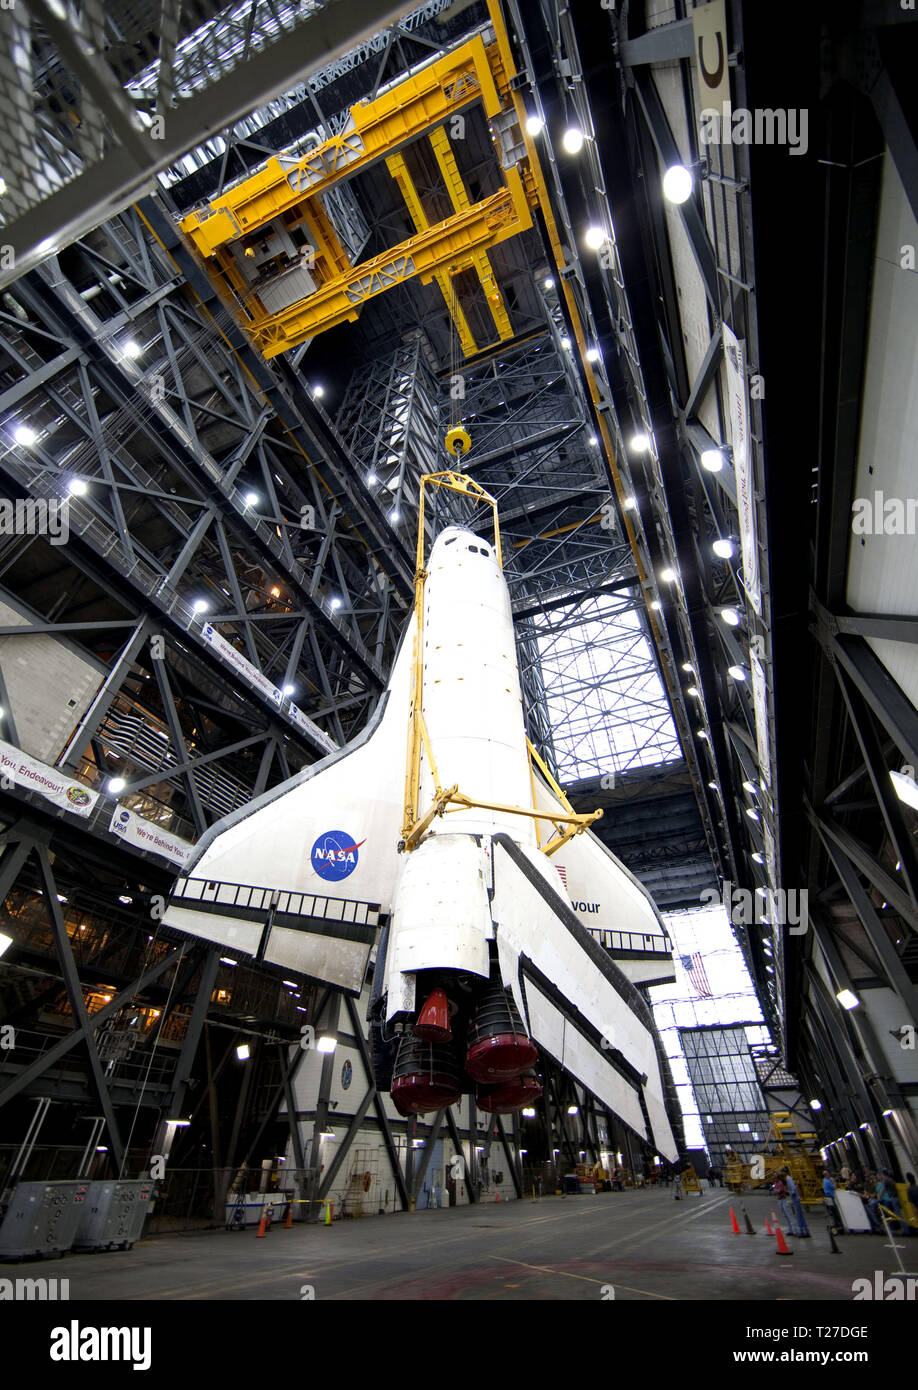 CAPE CANAVERAL, Fla. -- A large yellow, metal sling lifts shuttle Endeavour from the transfer aisle into a high bay of the Vehicle Assembly Building at NASA's Kennedy Space Center in Florida. In the bay, the shuttle will be attached to its external fuel tank and solid rocket boosters. Endeavour is targeted to roll out to Kennedy's Launch Pad 39A for its final mission, STS-134, on March 9. Stock Photo